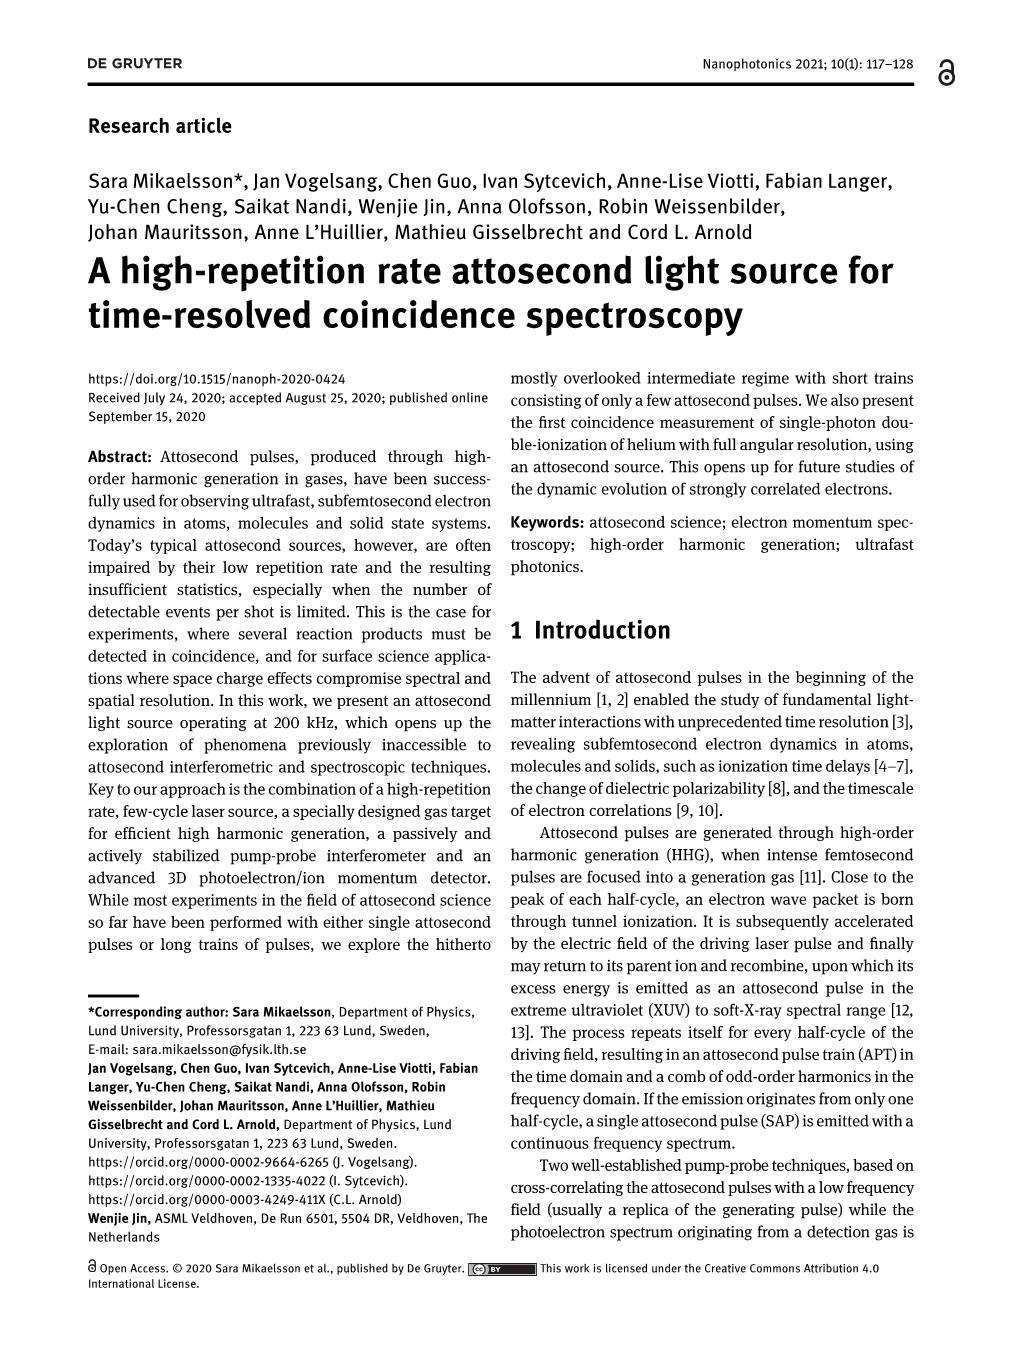 A High-Repetition Rate Attosecond Light Source for Time-Resolved